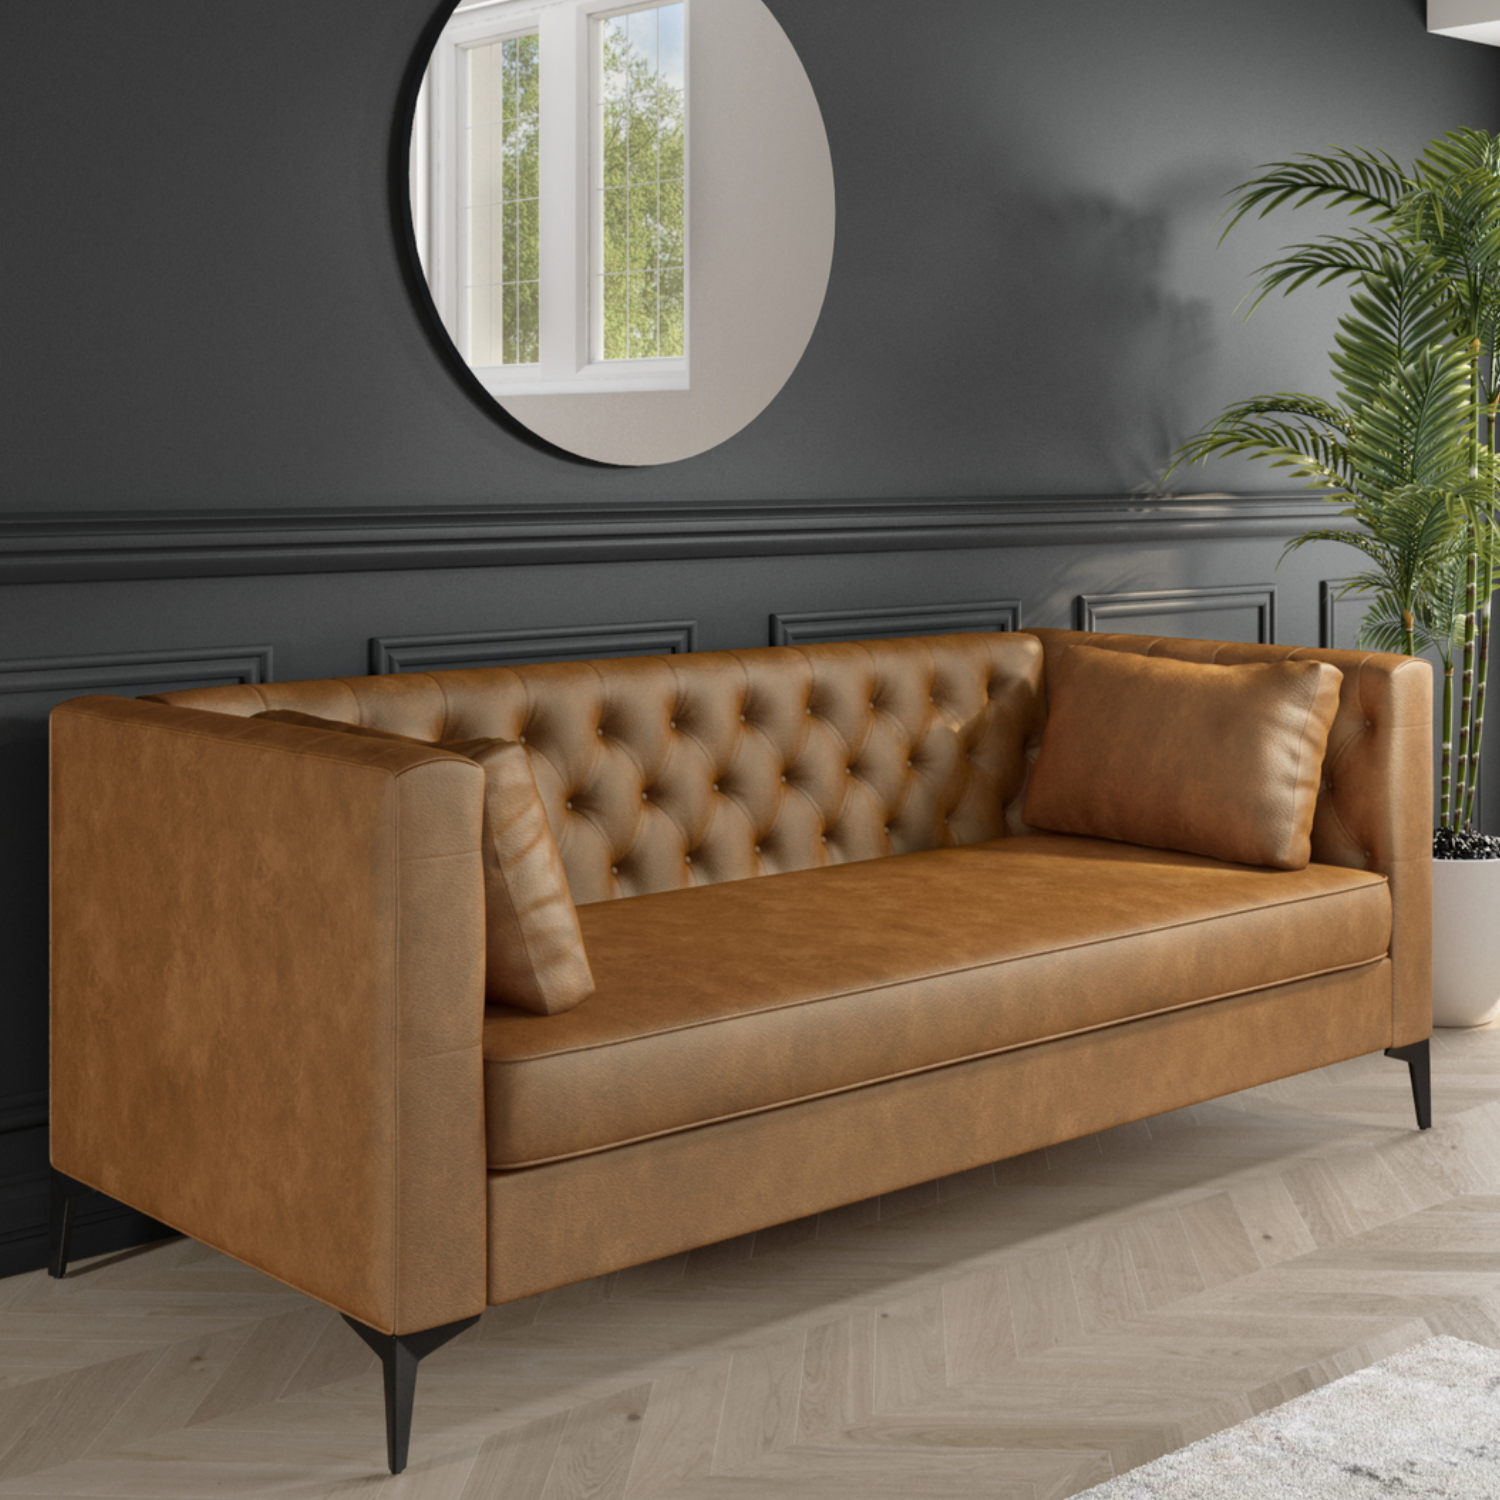 3 Seater Tan Faux Leather Sofa With, Pictures Of Leather Sofas